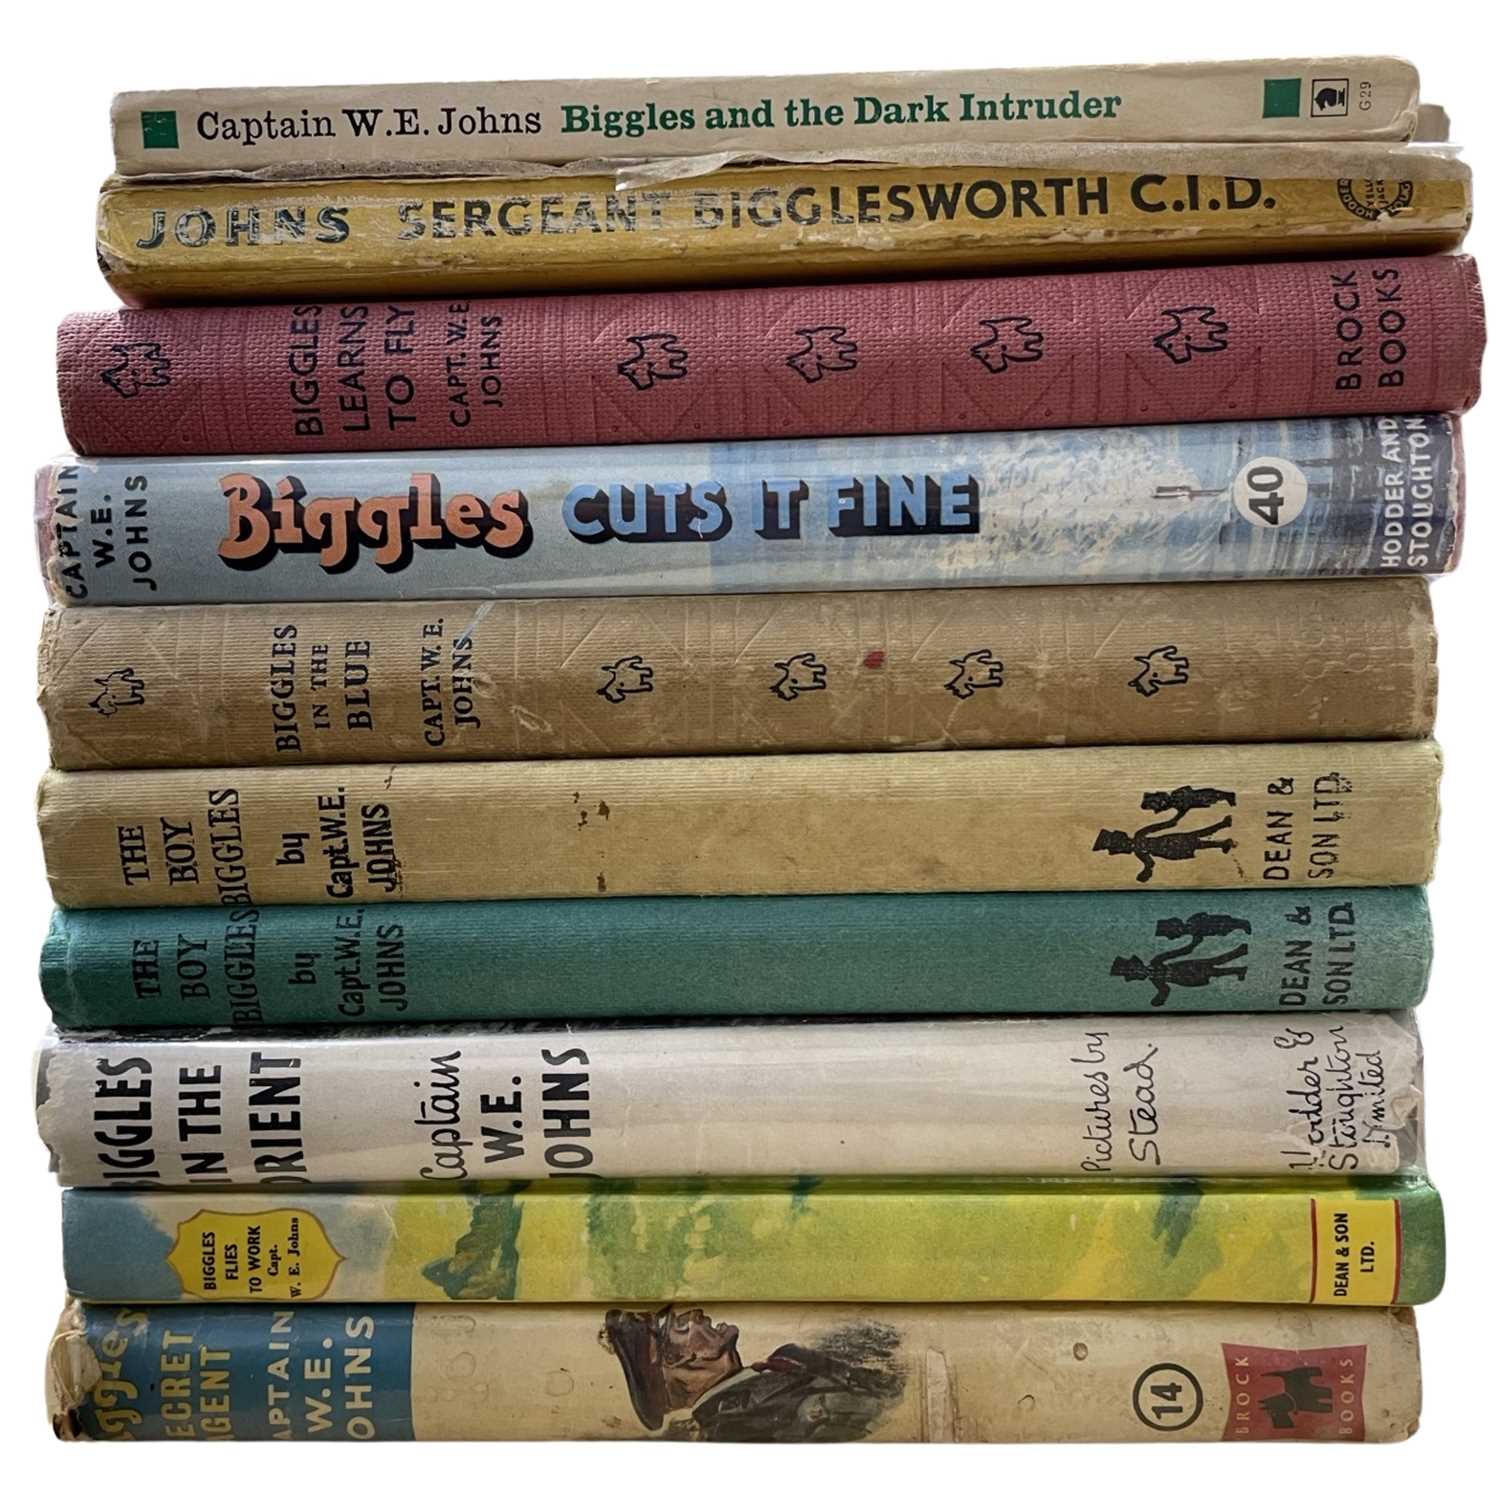 W E JOHNS: BIGGLES various titles and editions, to include: - Biggles Learns to Fly - Biggles Cuts - Image 2 of 2